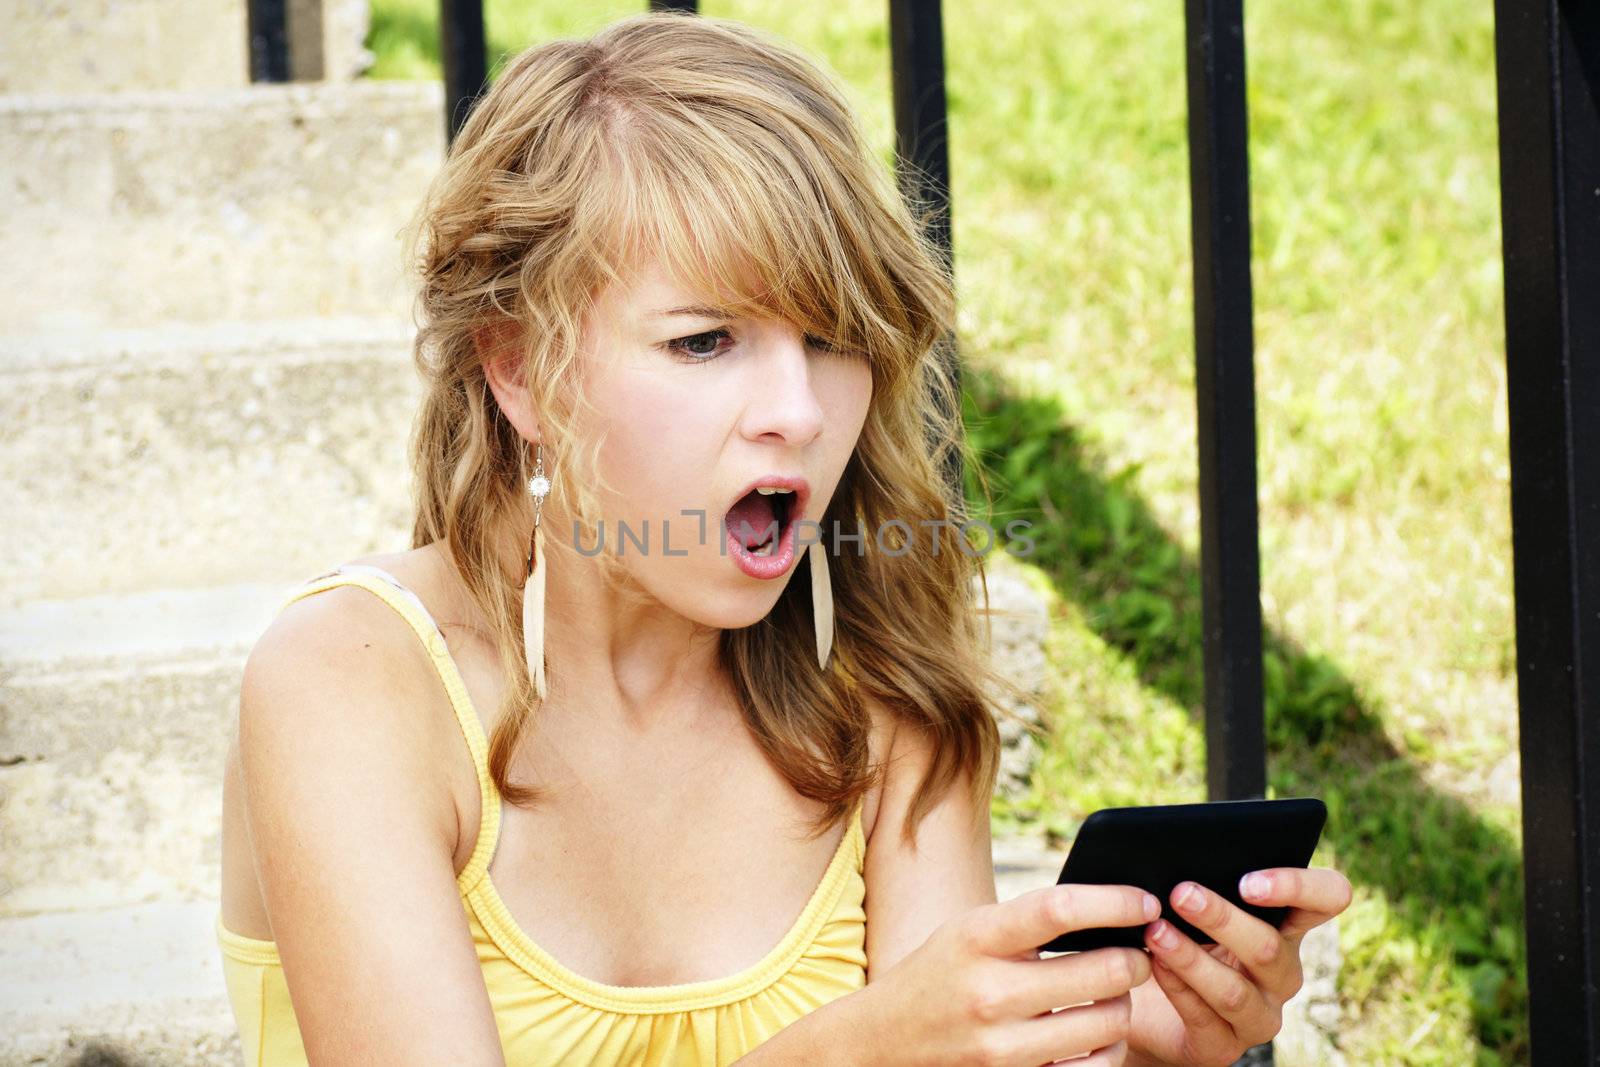 Young woman, teenager girl or student shocked at what she is reading on her cell phone, perfect for online intimidation or bullying at school.